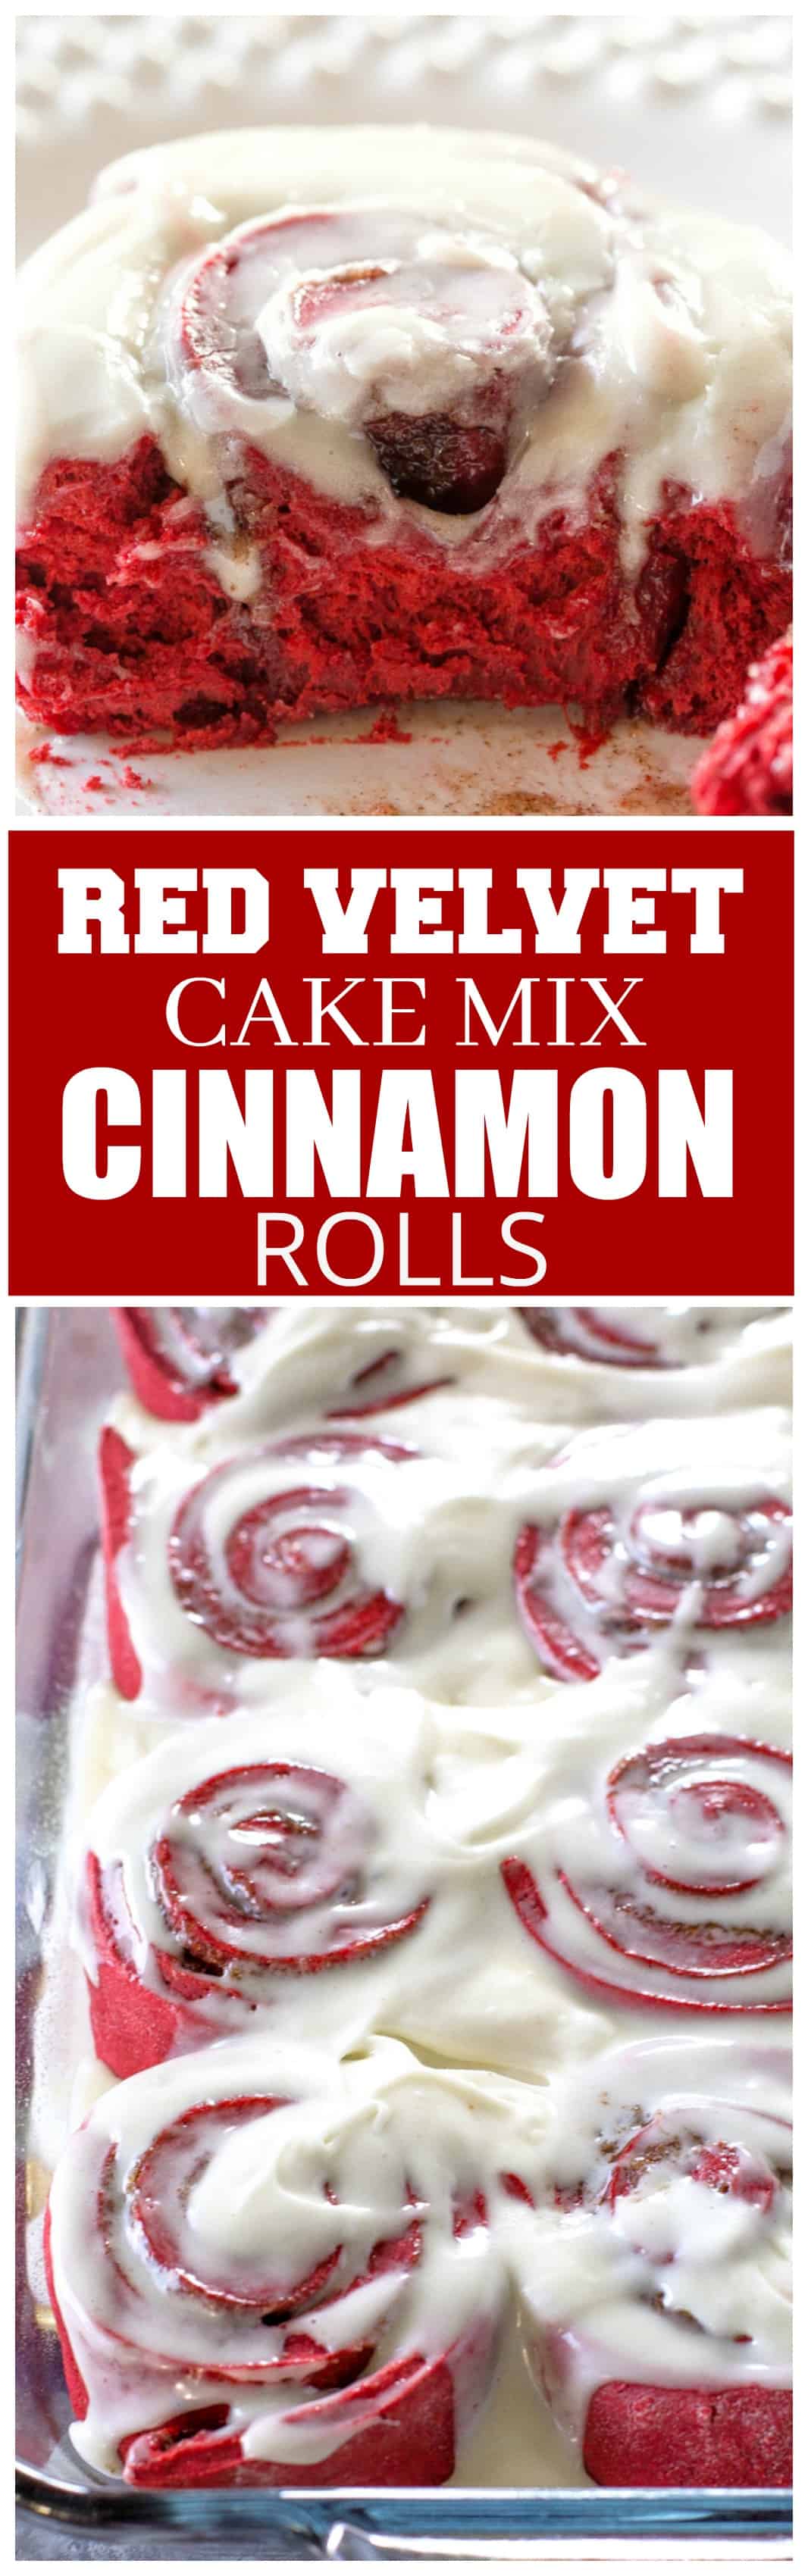 This Red Velvet Cake Mix Cinnamon Rolls recipe is easier than your from scratch rolls but taste just as good. #red #velvet #cinnamon #rolls #breakfast #recipe